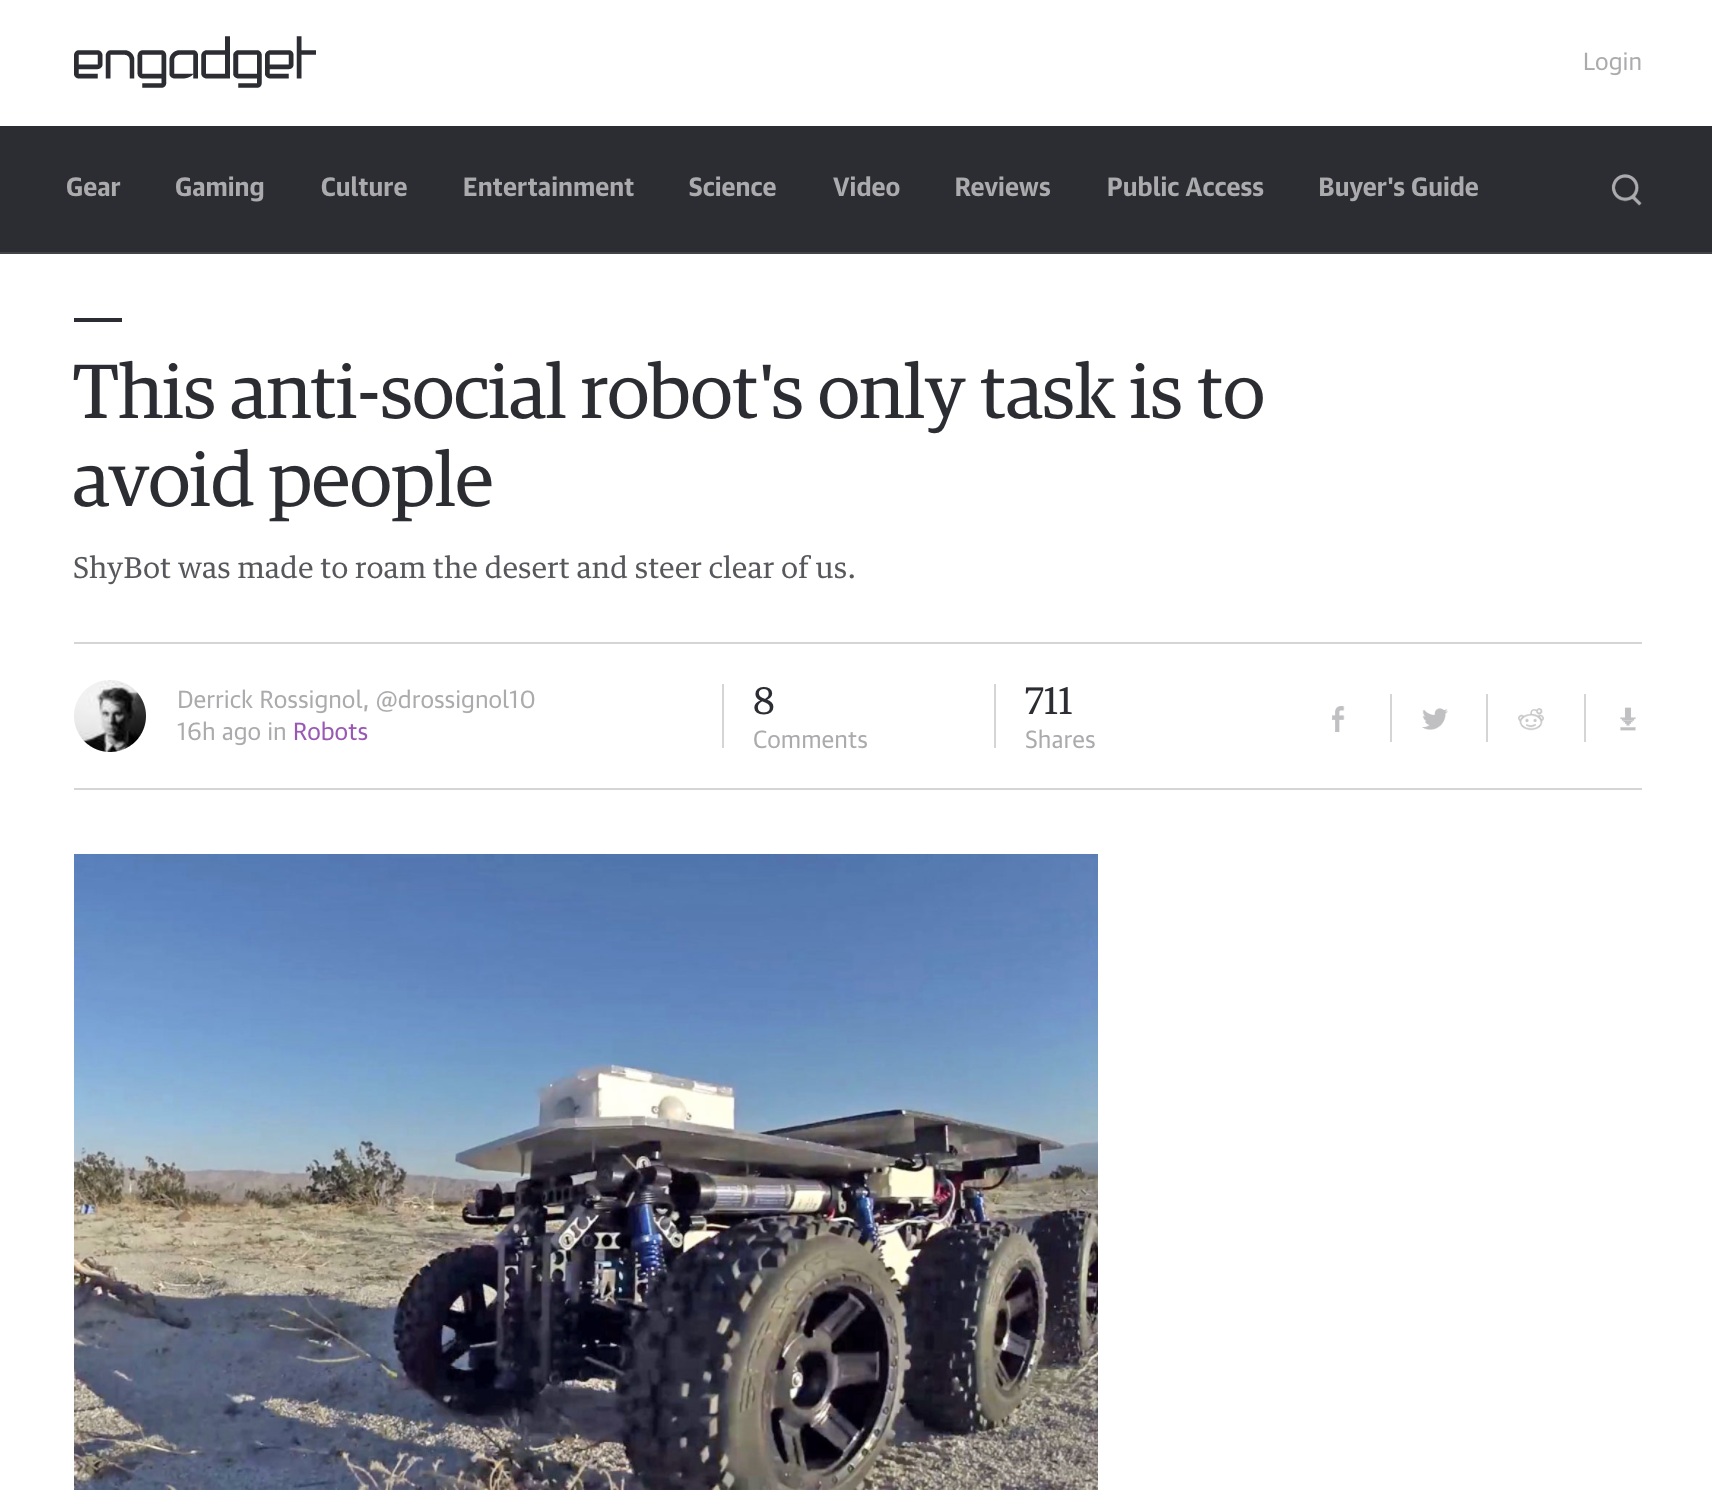 website - engadget Gear Gaming Culture Entertainment Science Video Reviews Public Access Buyer's Guide This antisocial robot's only task is to avoid people ShyBot was made to roam the desert and steer clear of us. 8 Derrick Rossignol dressing 16h again Ro